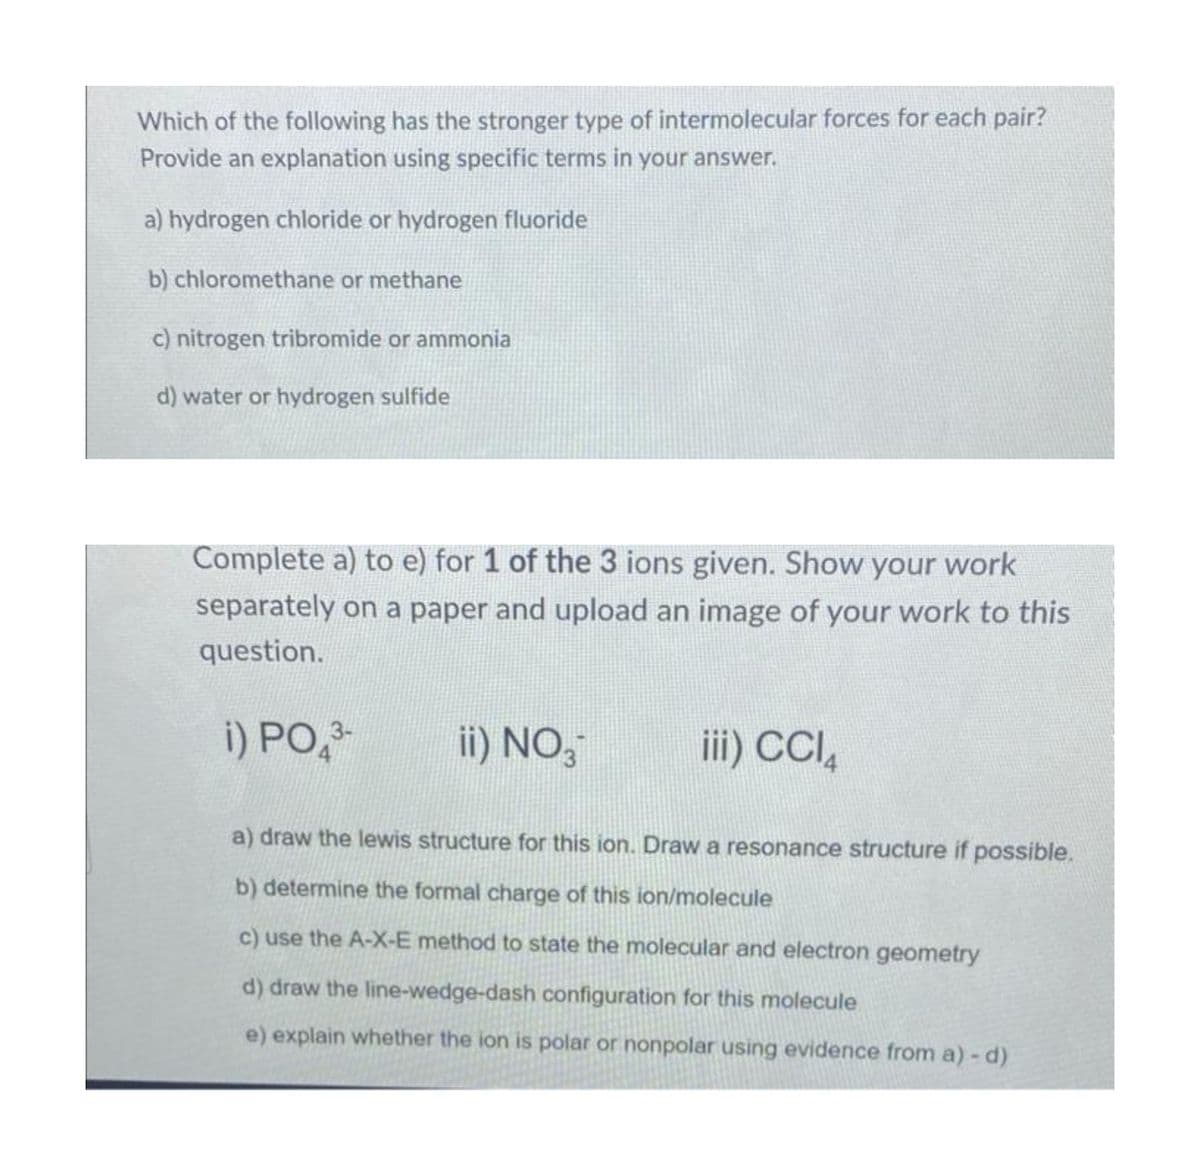 Which of the following has the stronger type of intermolecular forces for each pair?
Provide an explanation using specific terms in your answer.
a) hydrogen chloride or hydrogen fluoride
b) chloromethane or methane
c) nitrogen tribromide or ammonia
d) water or hydrogen sulfide
Complete a) to e) for 1 of the 3 ions given. Show your work
separately on a paper and upload an image of your work to this
question.
i) PO 3-
ii) NO 3
iii) CCl4
a) draw the lewis structure for this ion. Draw a resonance structure if possible.
b) determine the formal charge of this ion/molecule
c) use the A-X-E method to state the molecular and electron geometry
d) draw the line-wedge-dash configuration for this molecule
e) explain whether the ion is polar or nonpolar using evidence from a) - d)